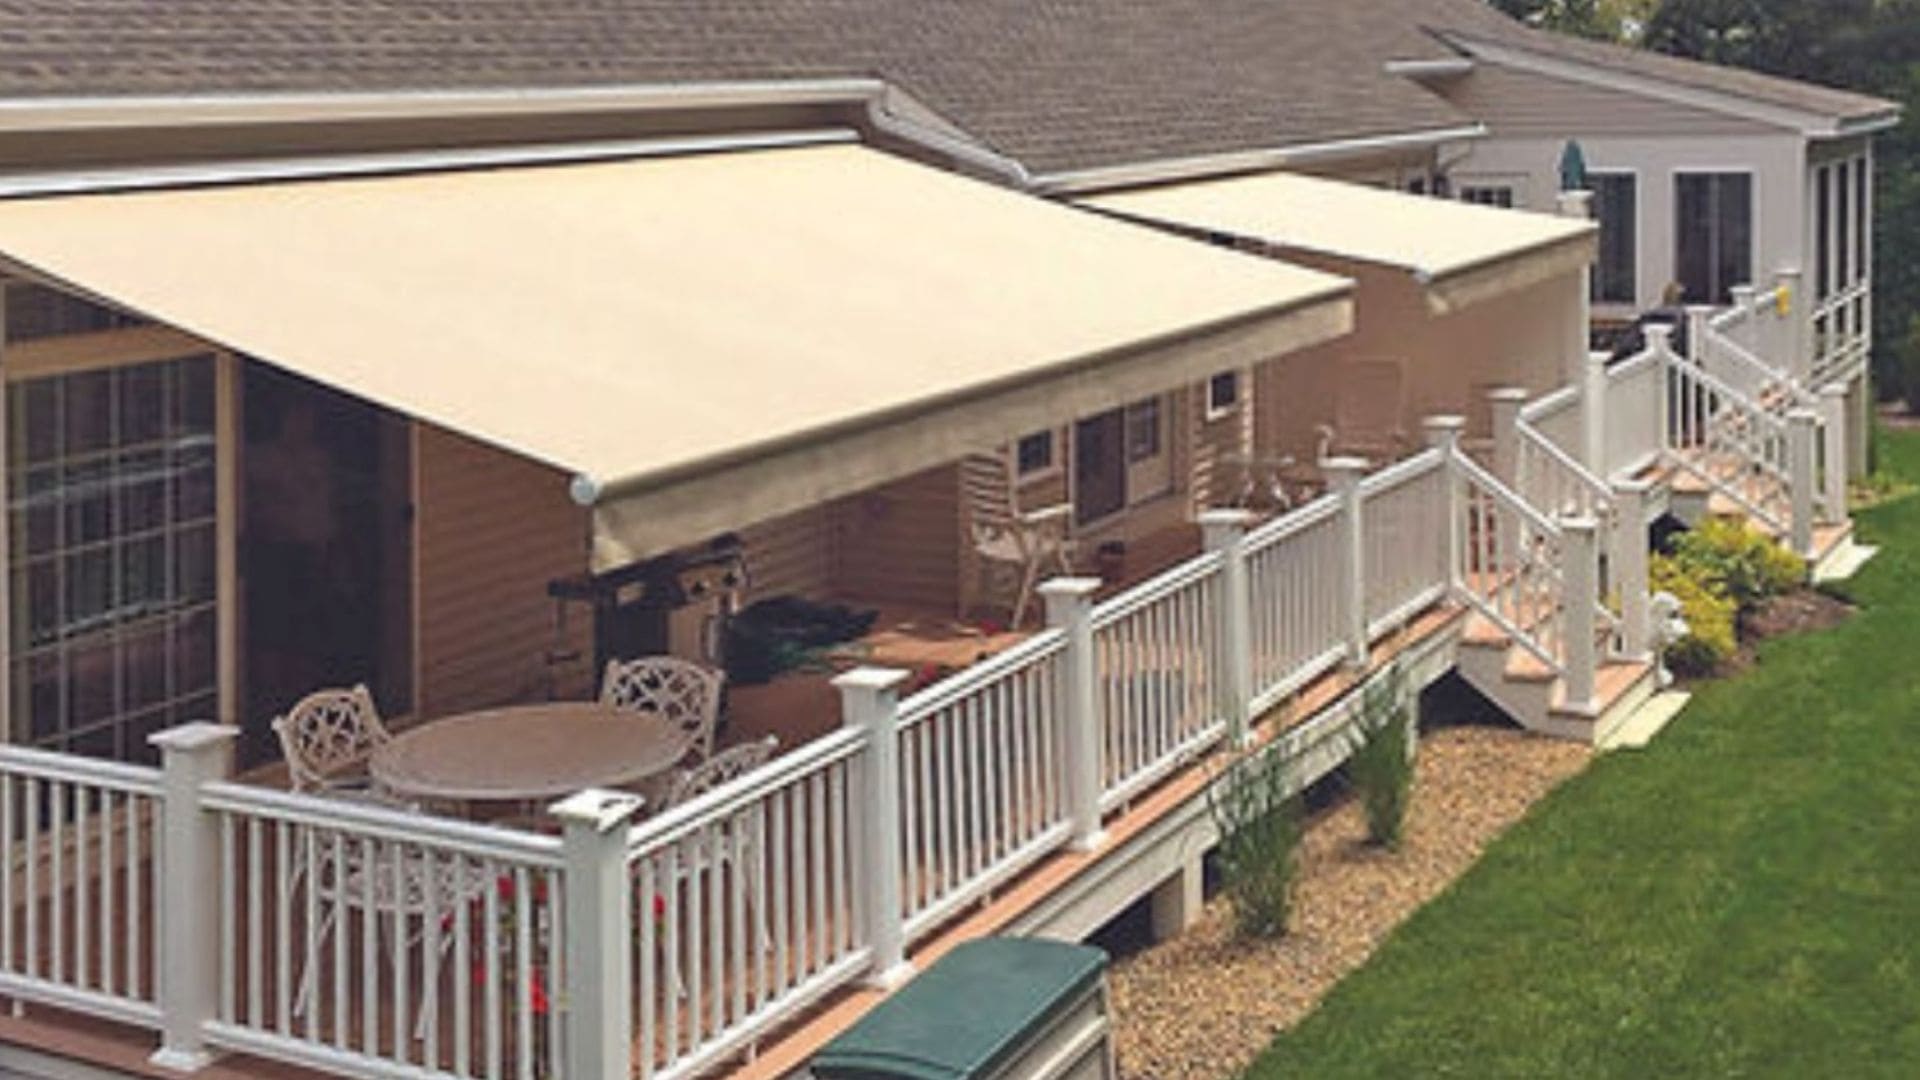 How Much Do Retractable Awnings Cost in 2022?